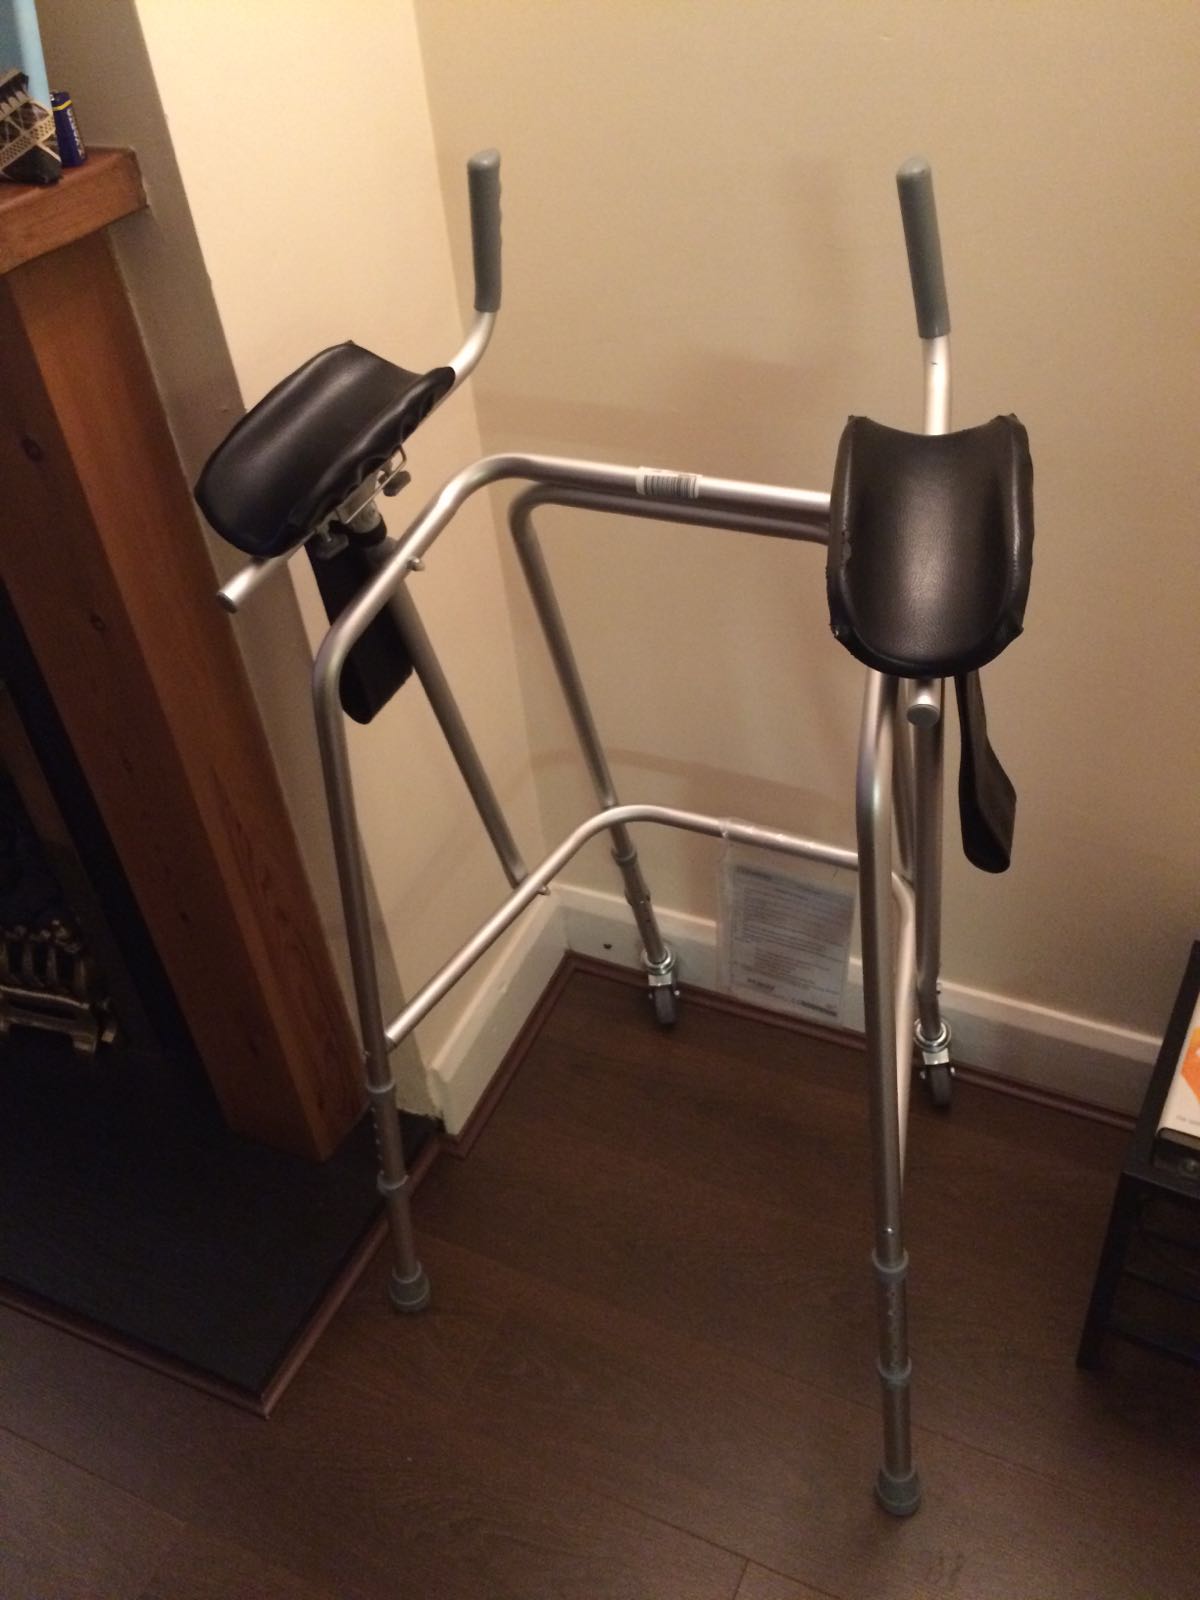 I'm really looking forward to using this piece of equipment. It's to help me start walking again. A physio hasn't come to the house yet to help me exercise but when they do I hope they talk me through how to use it - because I just want to practise, practise, practise walking again!